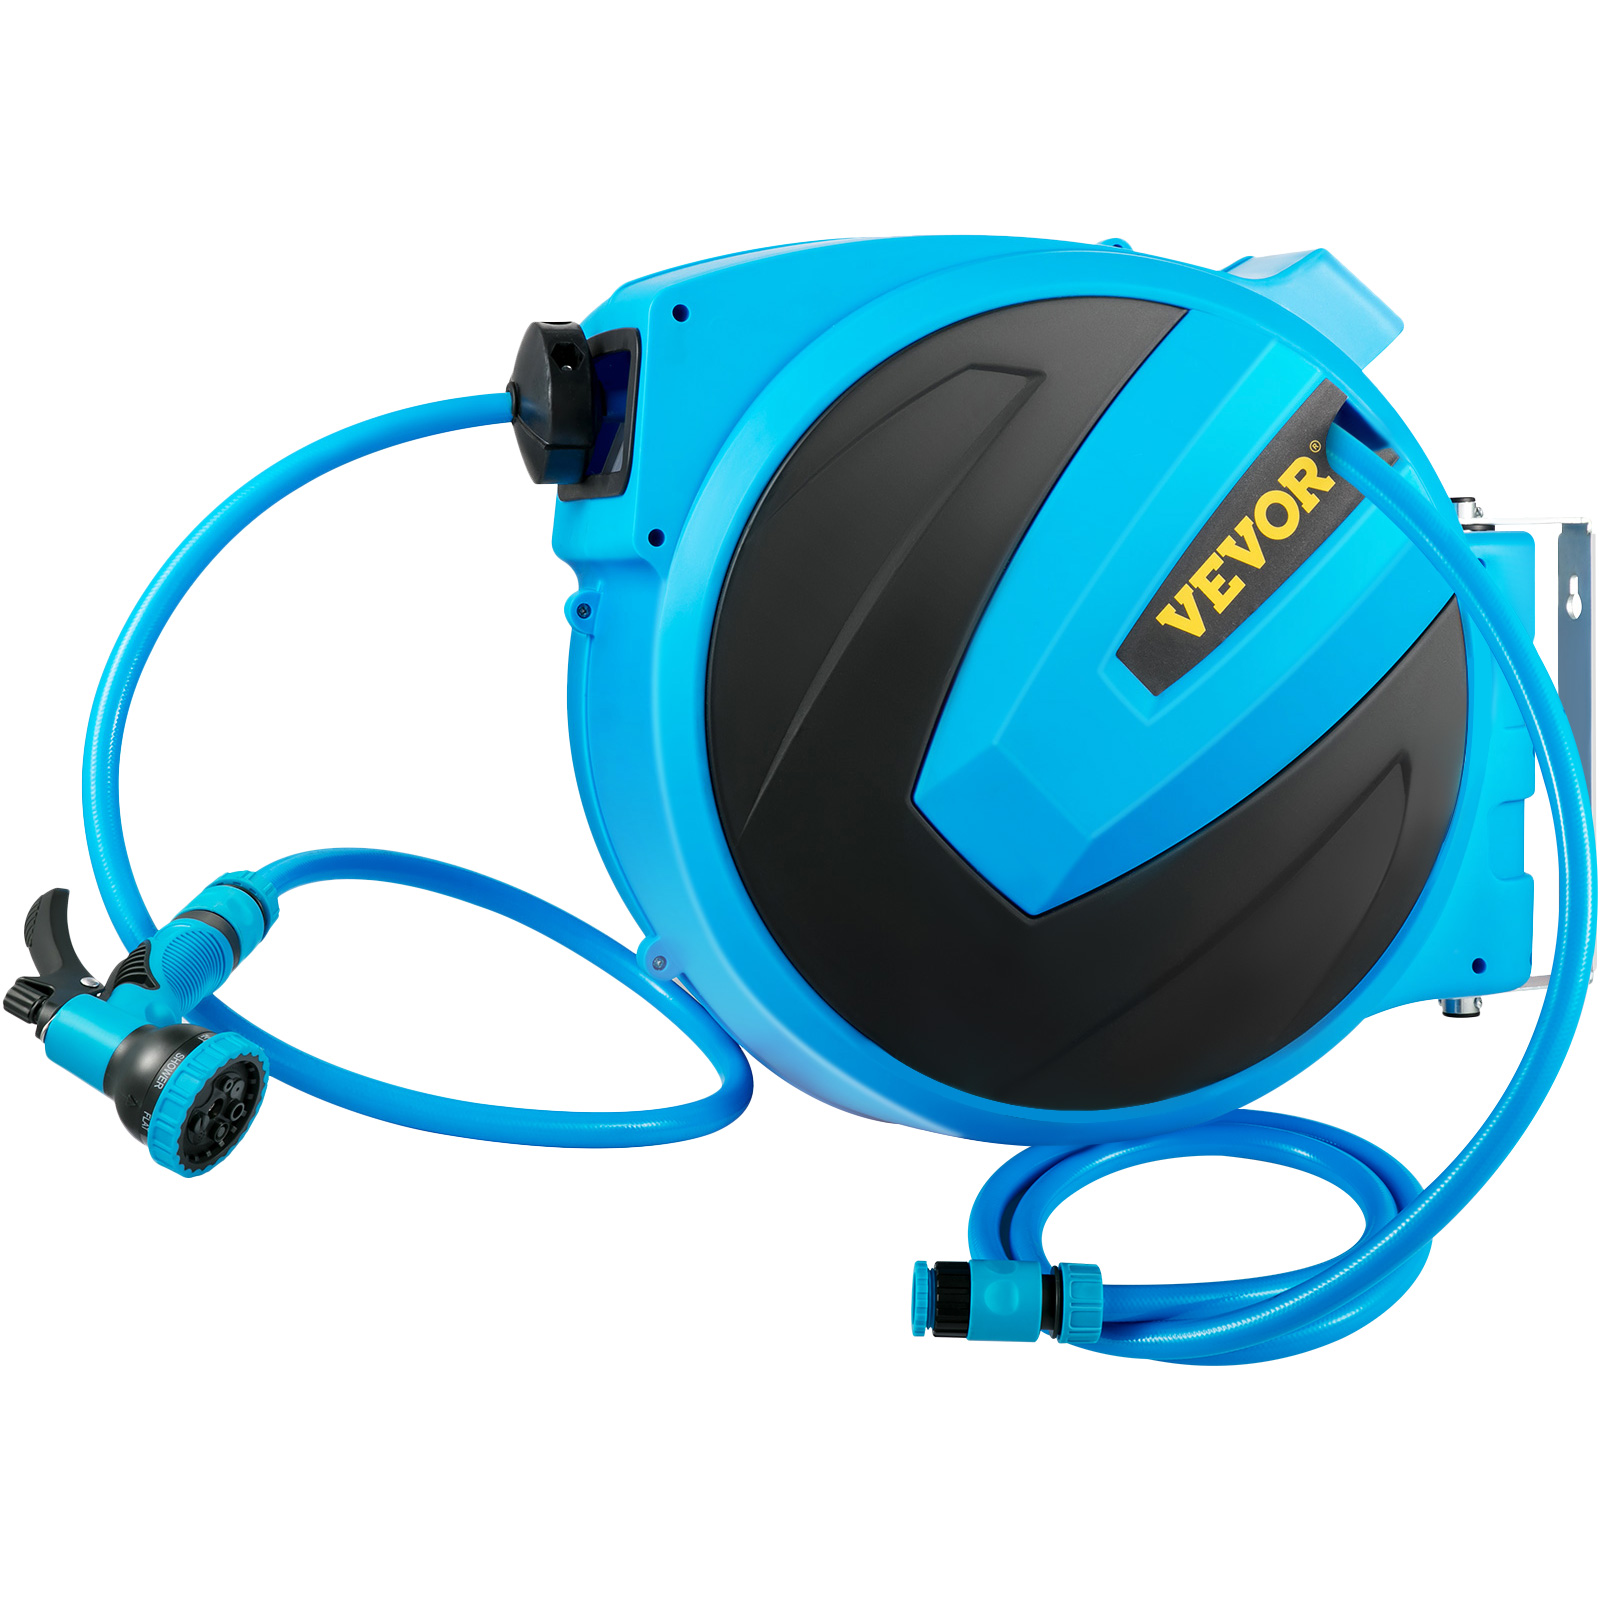 VEVOR Retractable Hose Reel, 5/8 inch x 90 ft, Any Length Lock